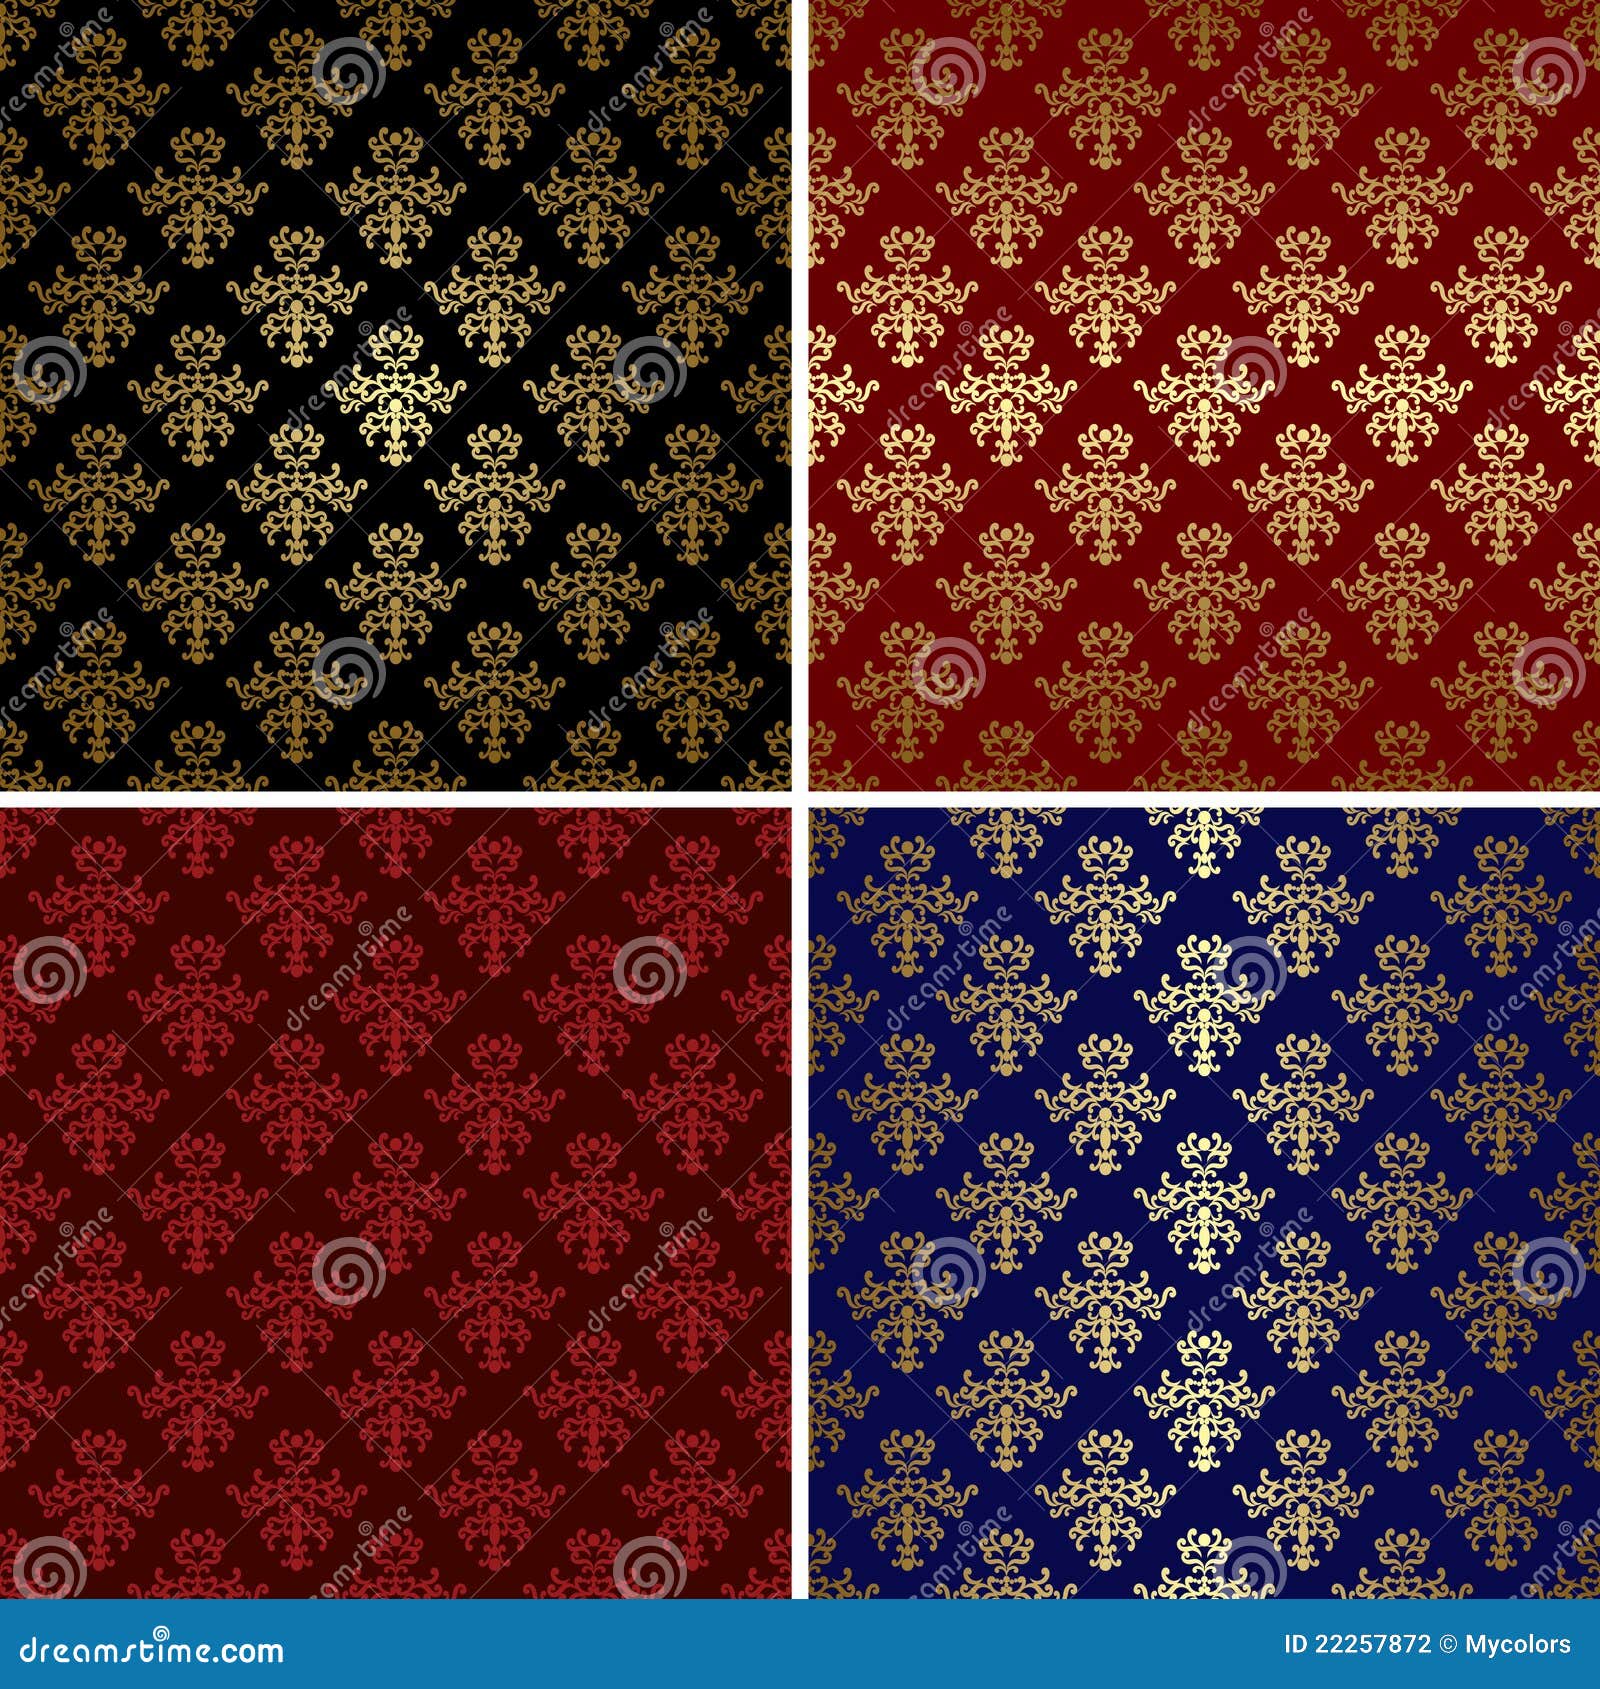 set of vintage patterns with gold tracery - eps